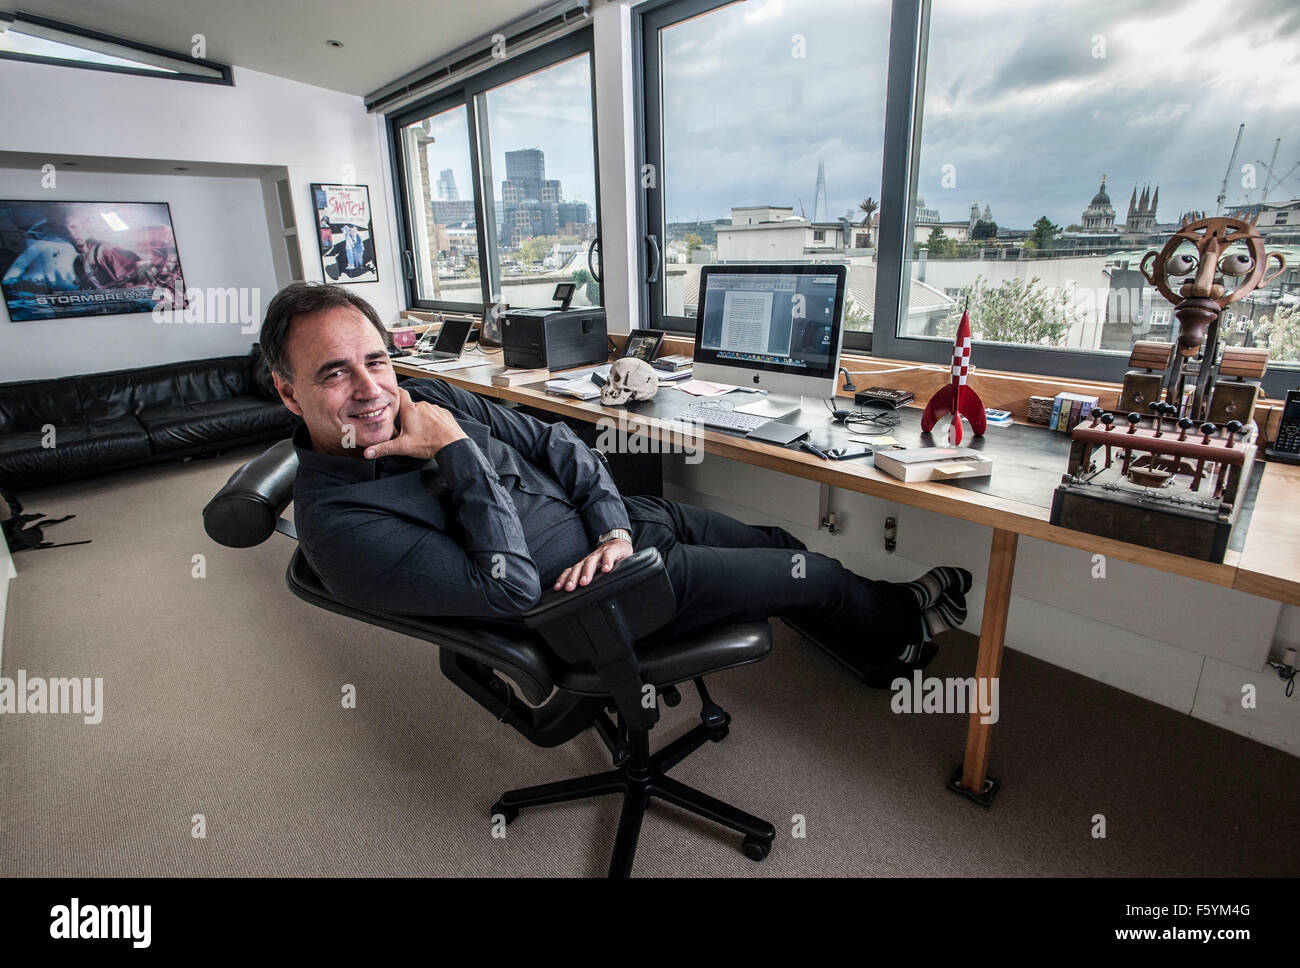 Writer Anthony Horowitz At Desk In His Home Office Stock Photo